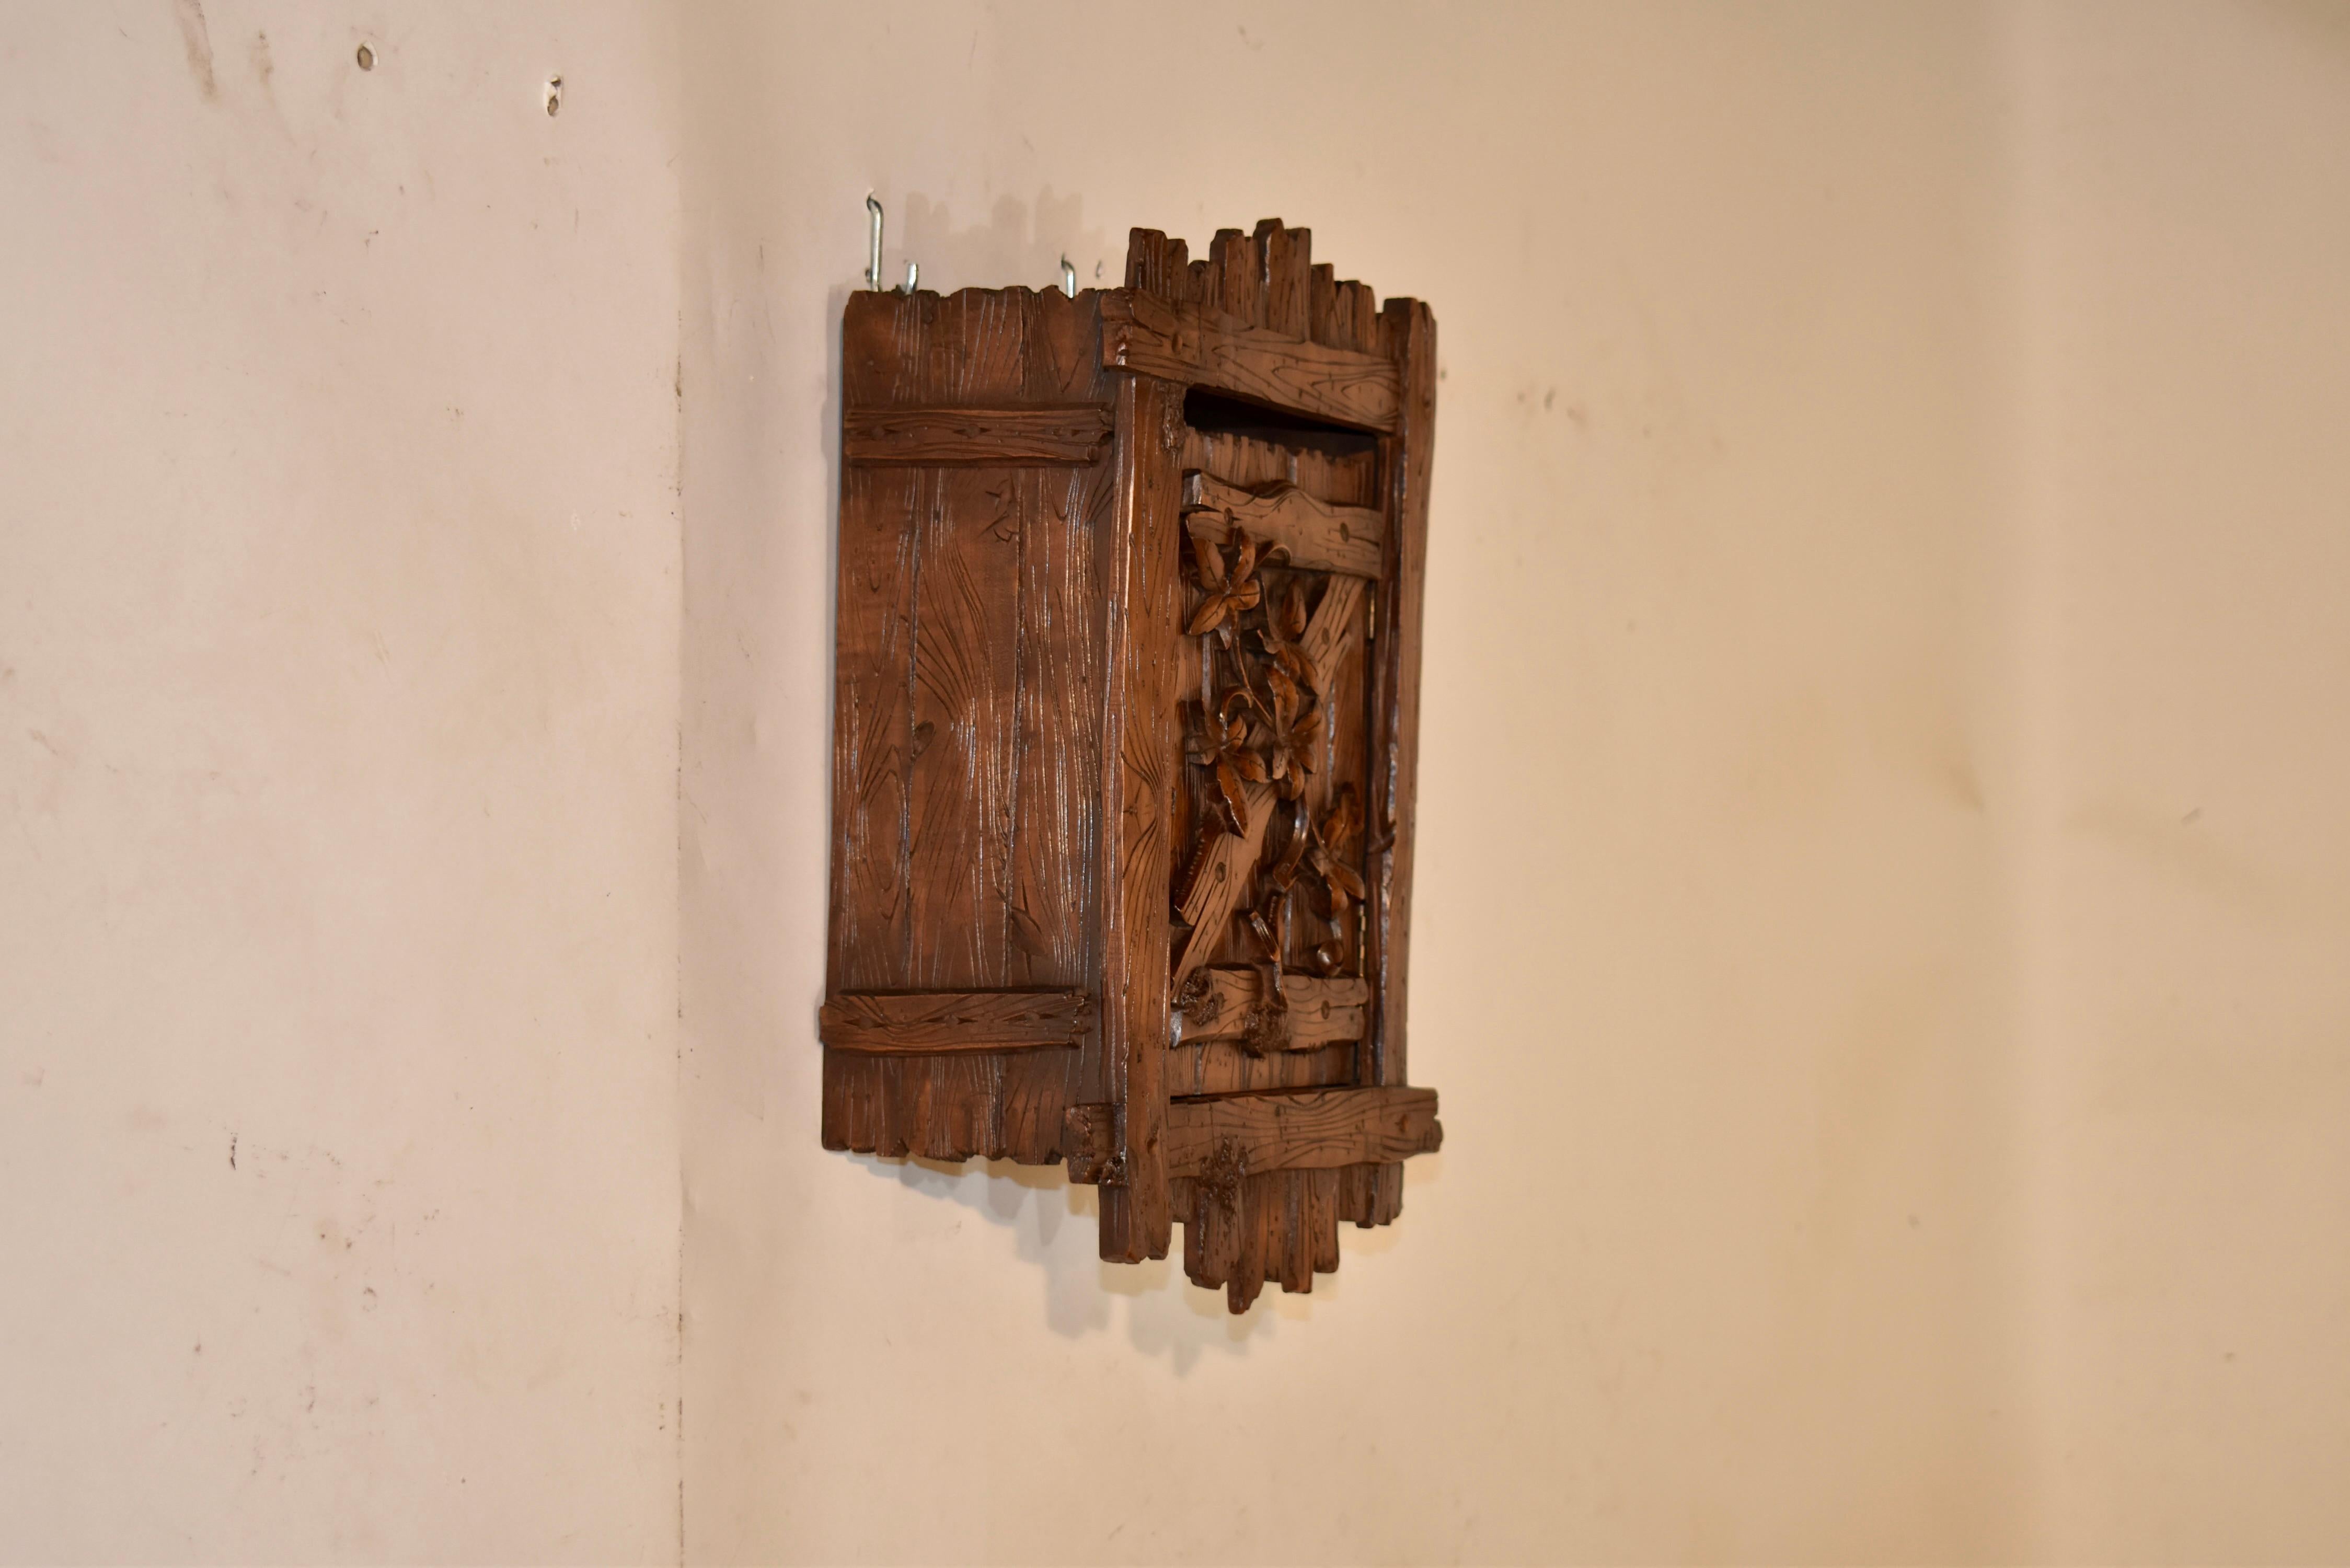 19th century Black Forest small hanging wall box.  The entire piece is hand carved to have the appearance of boards with hand carved appearance of graining.  There is a single door on the front, also with the appearance of boards and the added